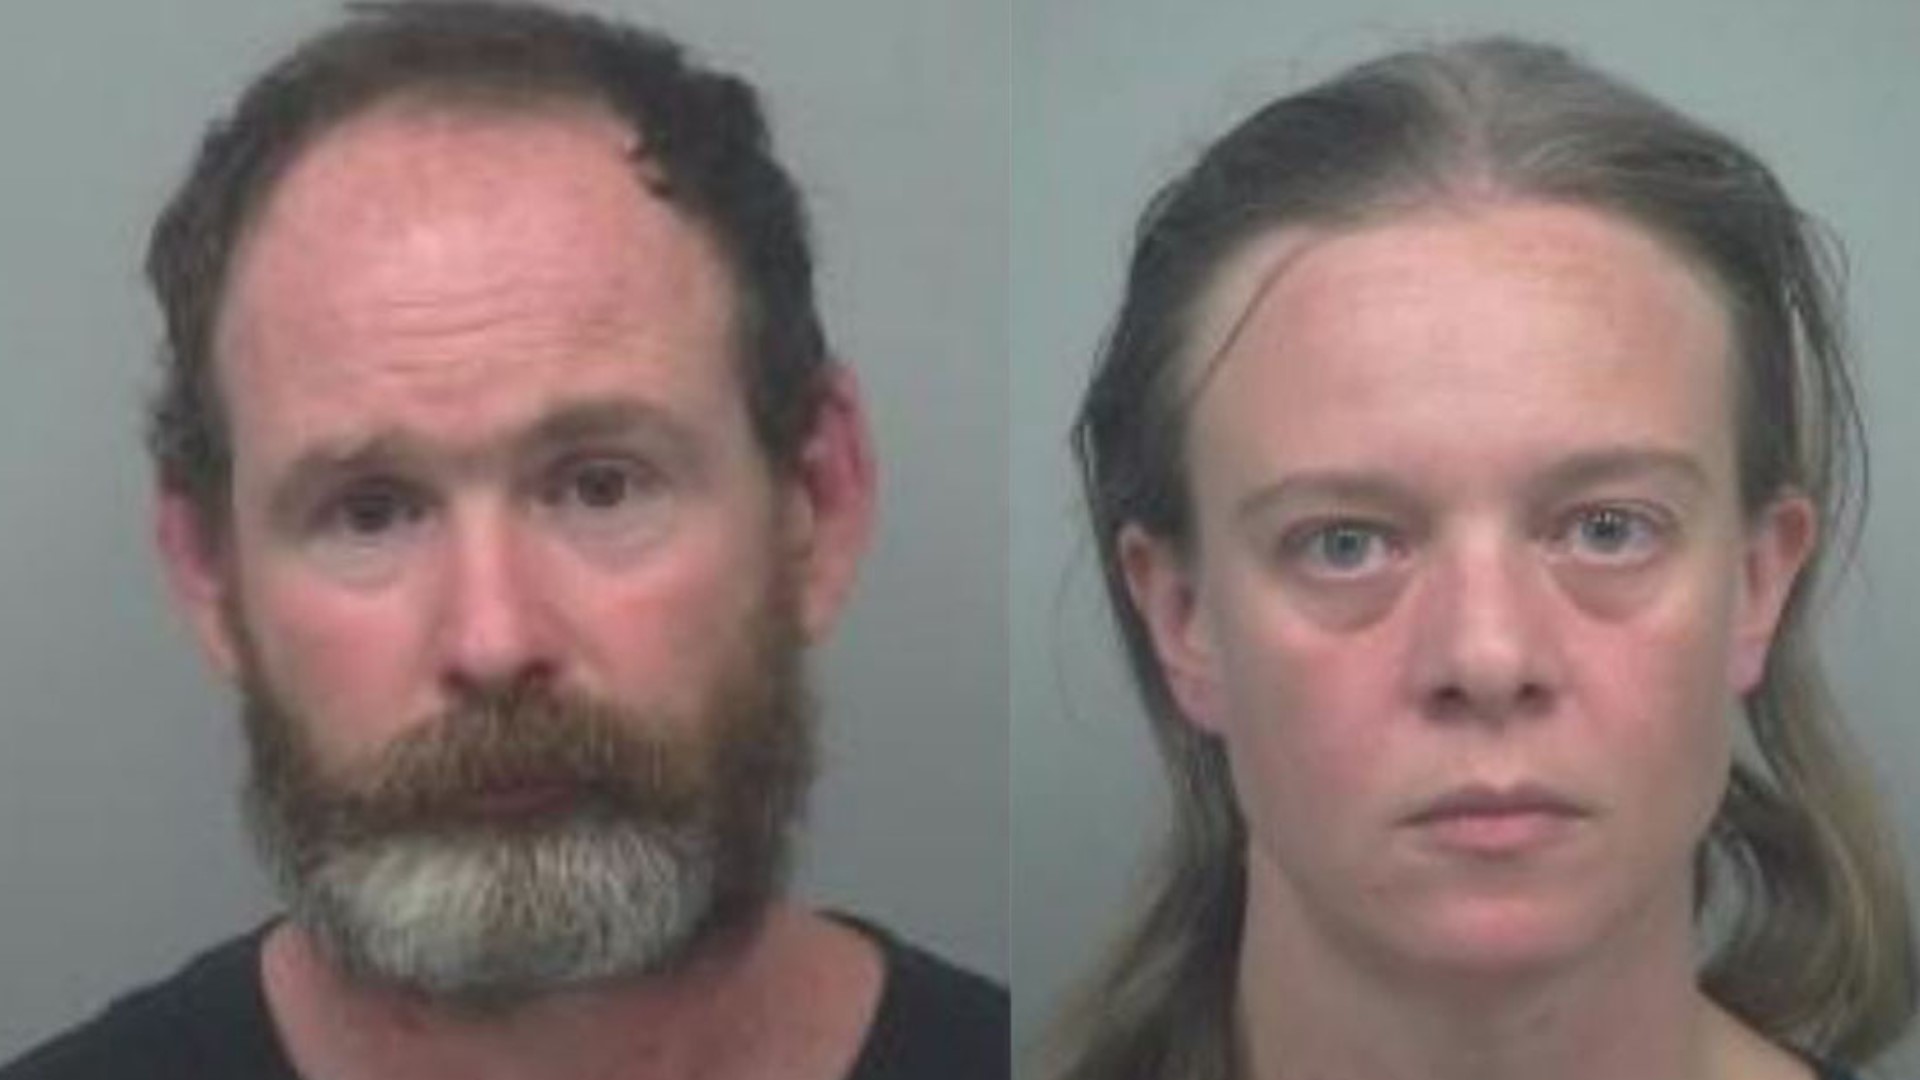 The pair face charges of cruelty to children in the first and second degree and false imprisonment in connection with the fire at their home.